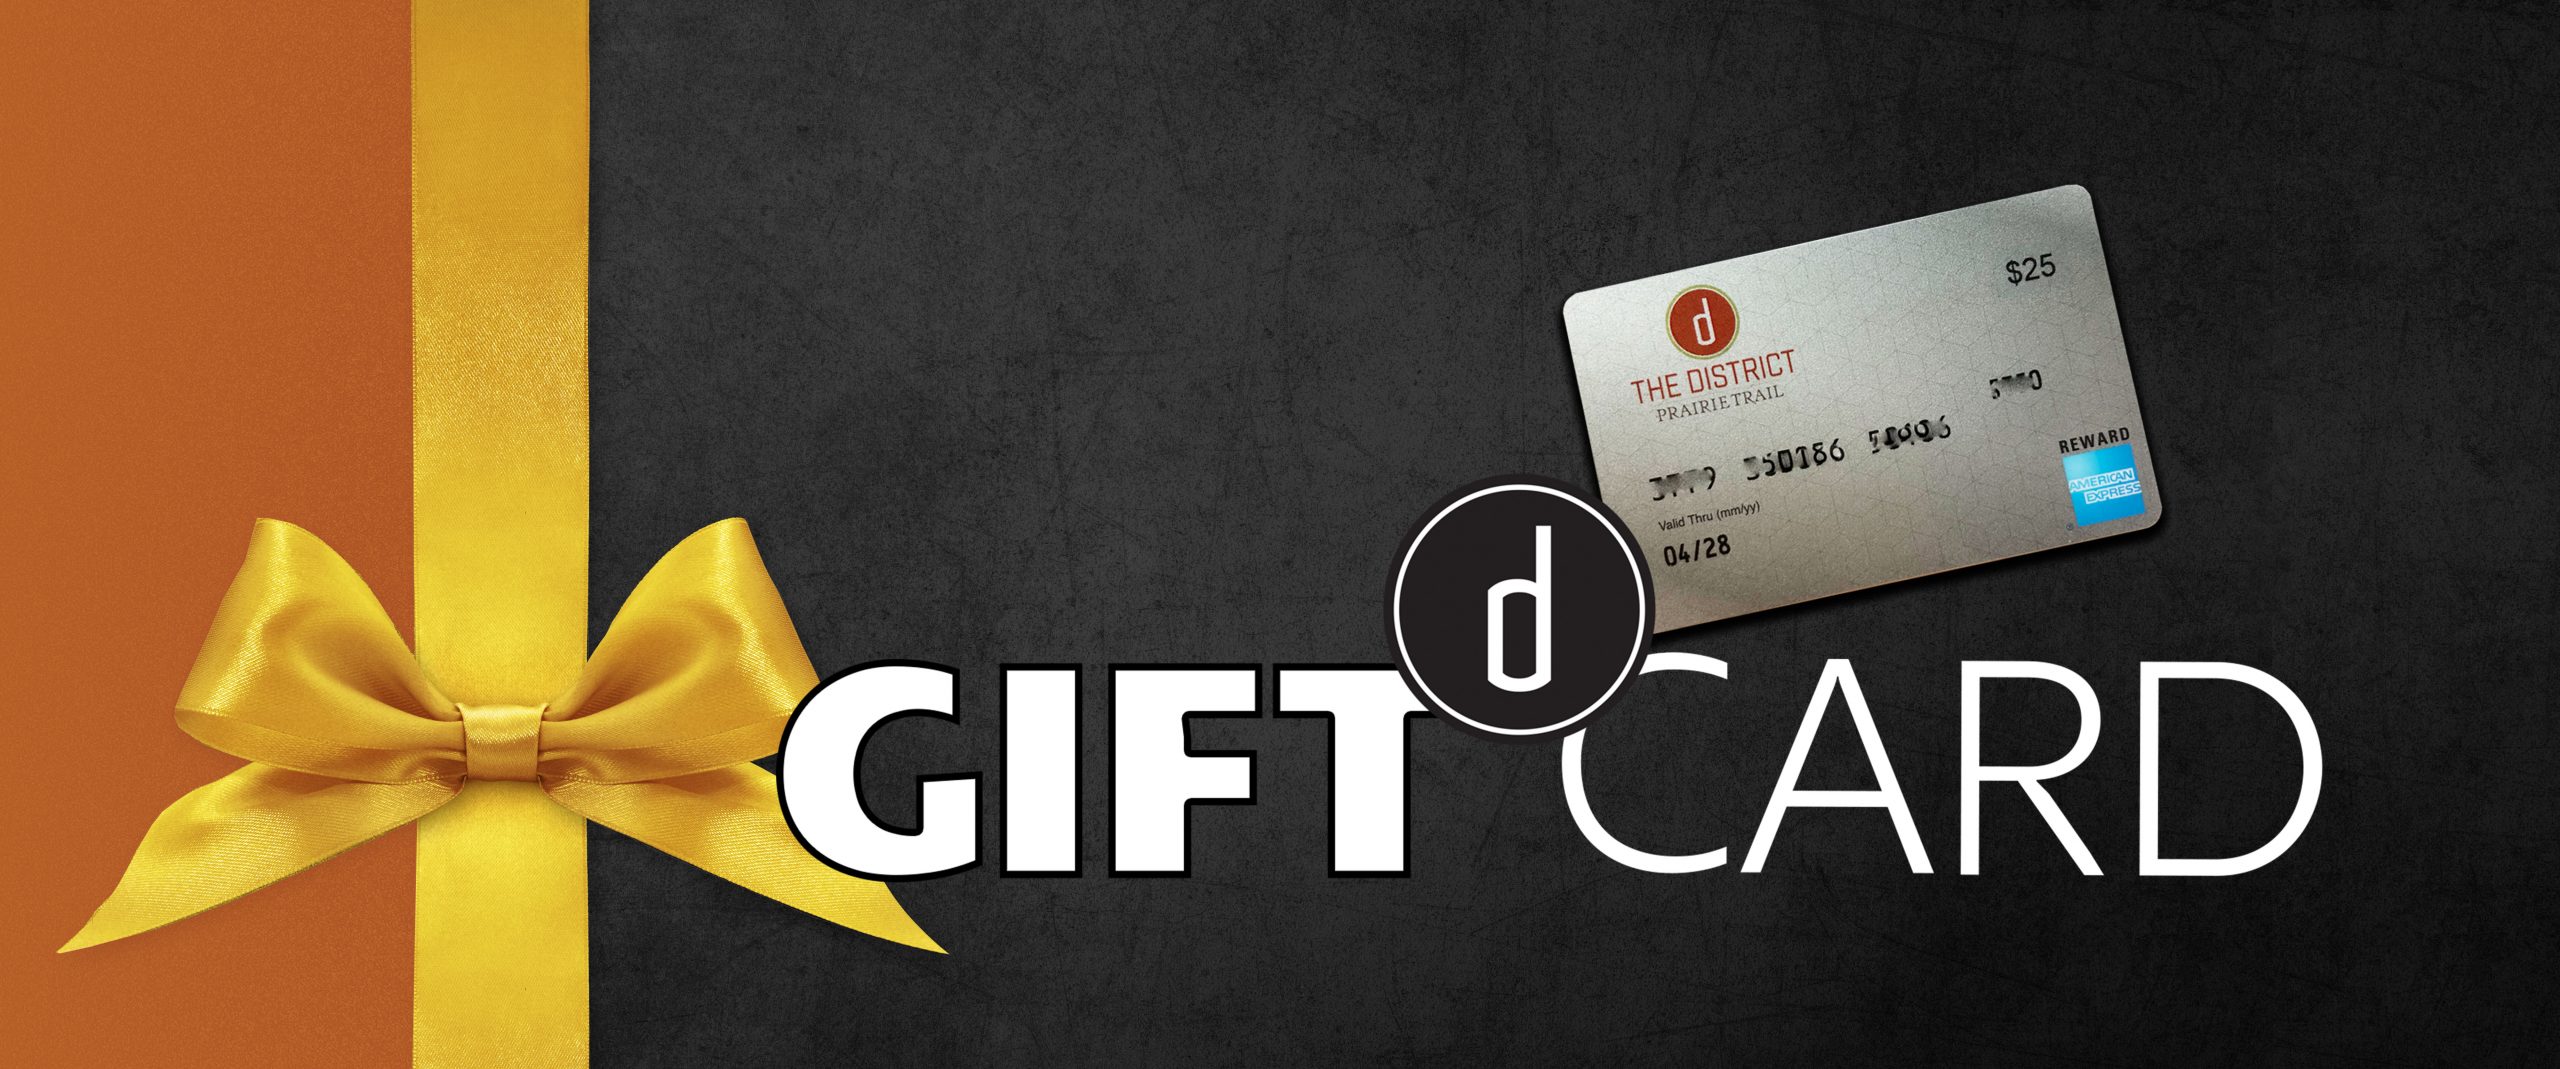 District Gift Card $25